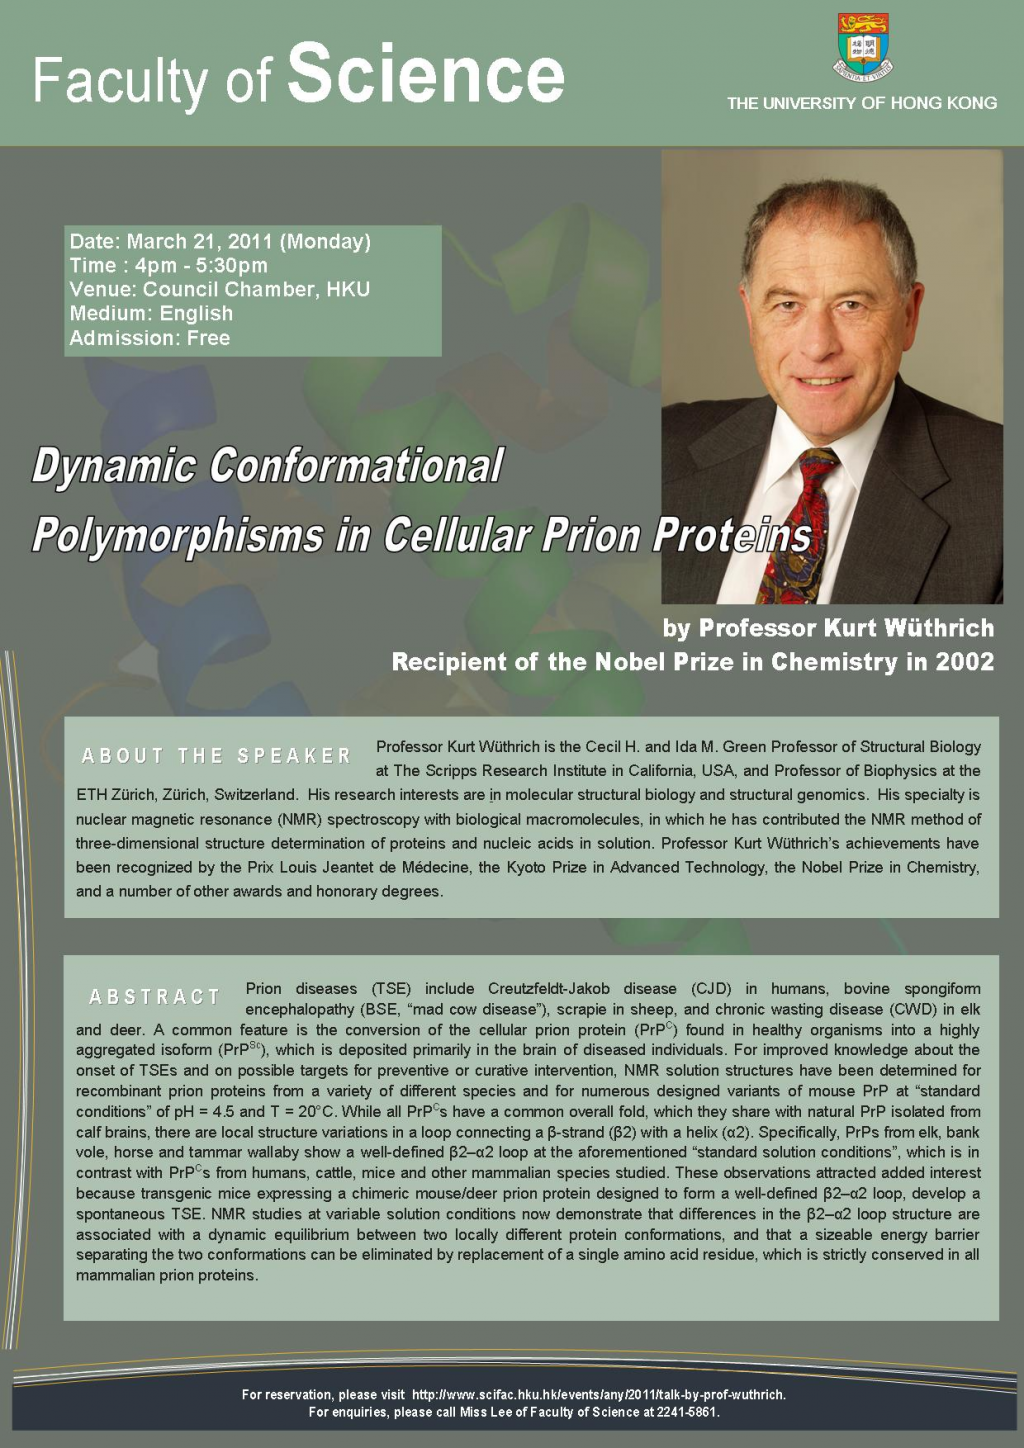 Dynamic Conformational Polymorphisms in Cellular Prion Proteins by Professor Kurt Wüthrich, Recipient of the Nobel Prize in Chemistry in 2002